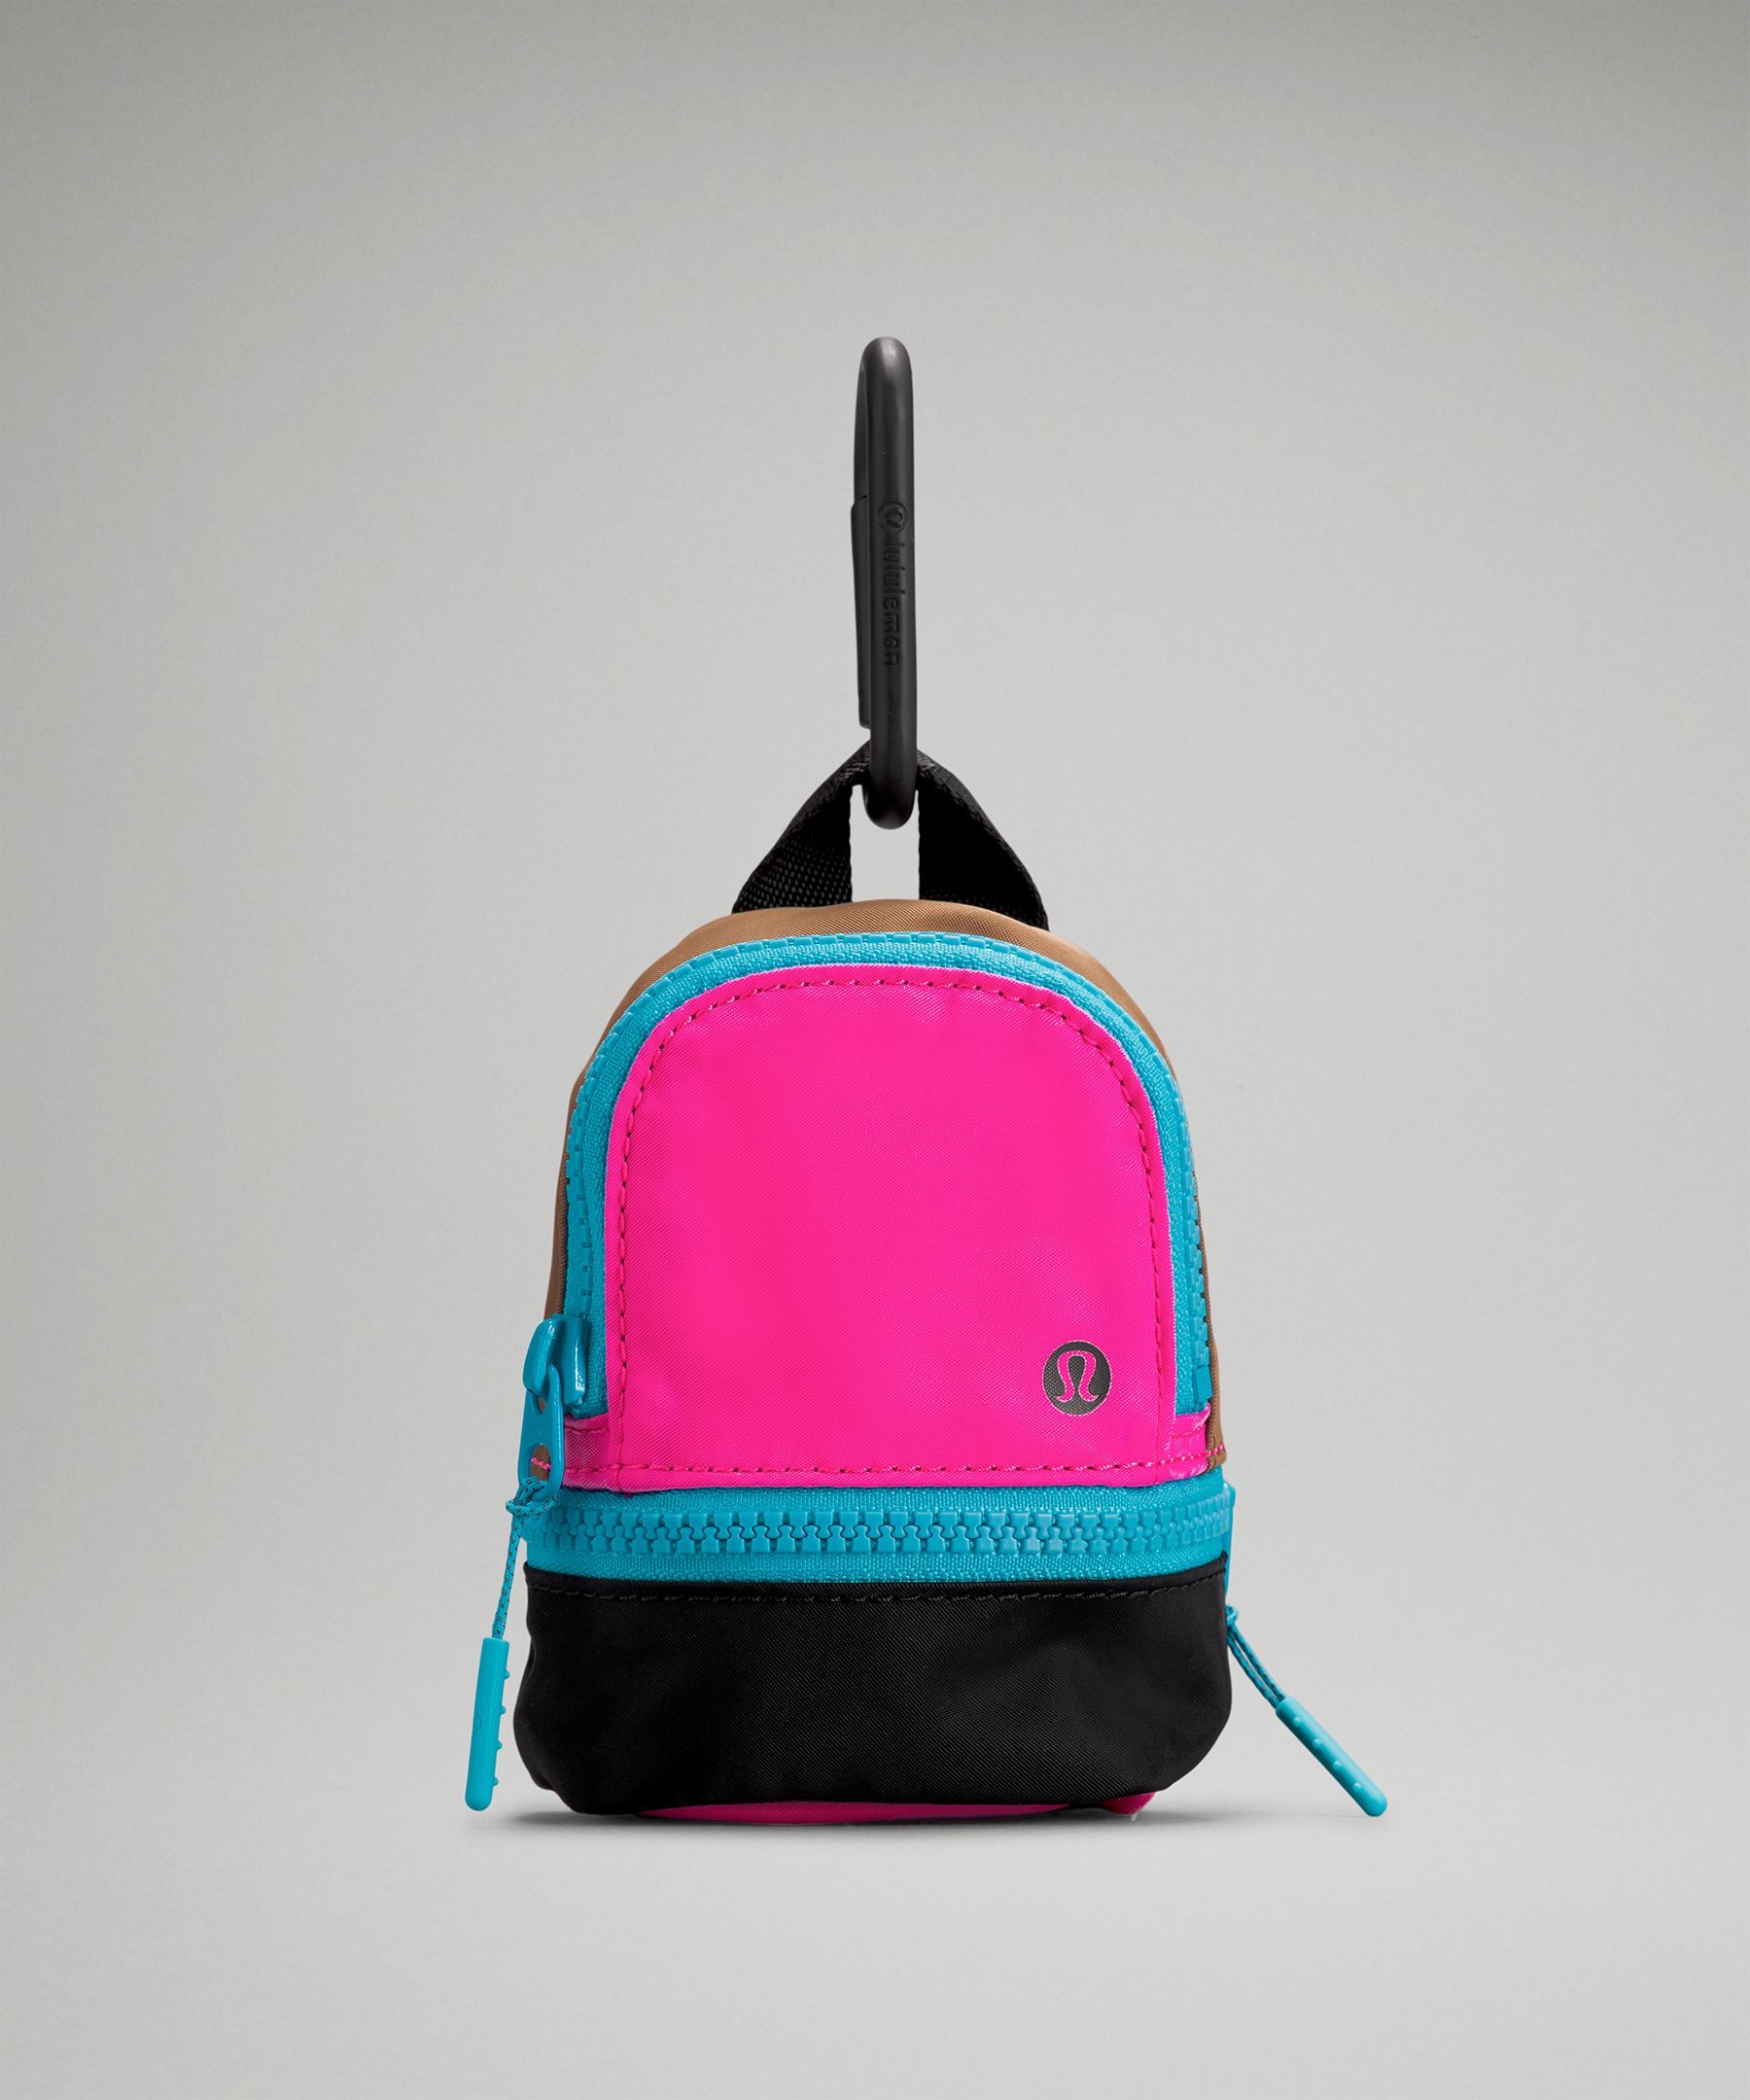 Lululemon Nano Backpacks Are What the Cool Dogs on TikTok Are Wearing